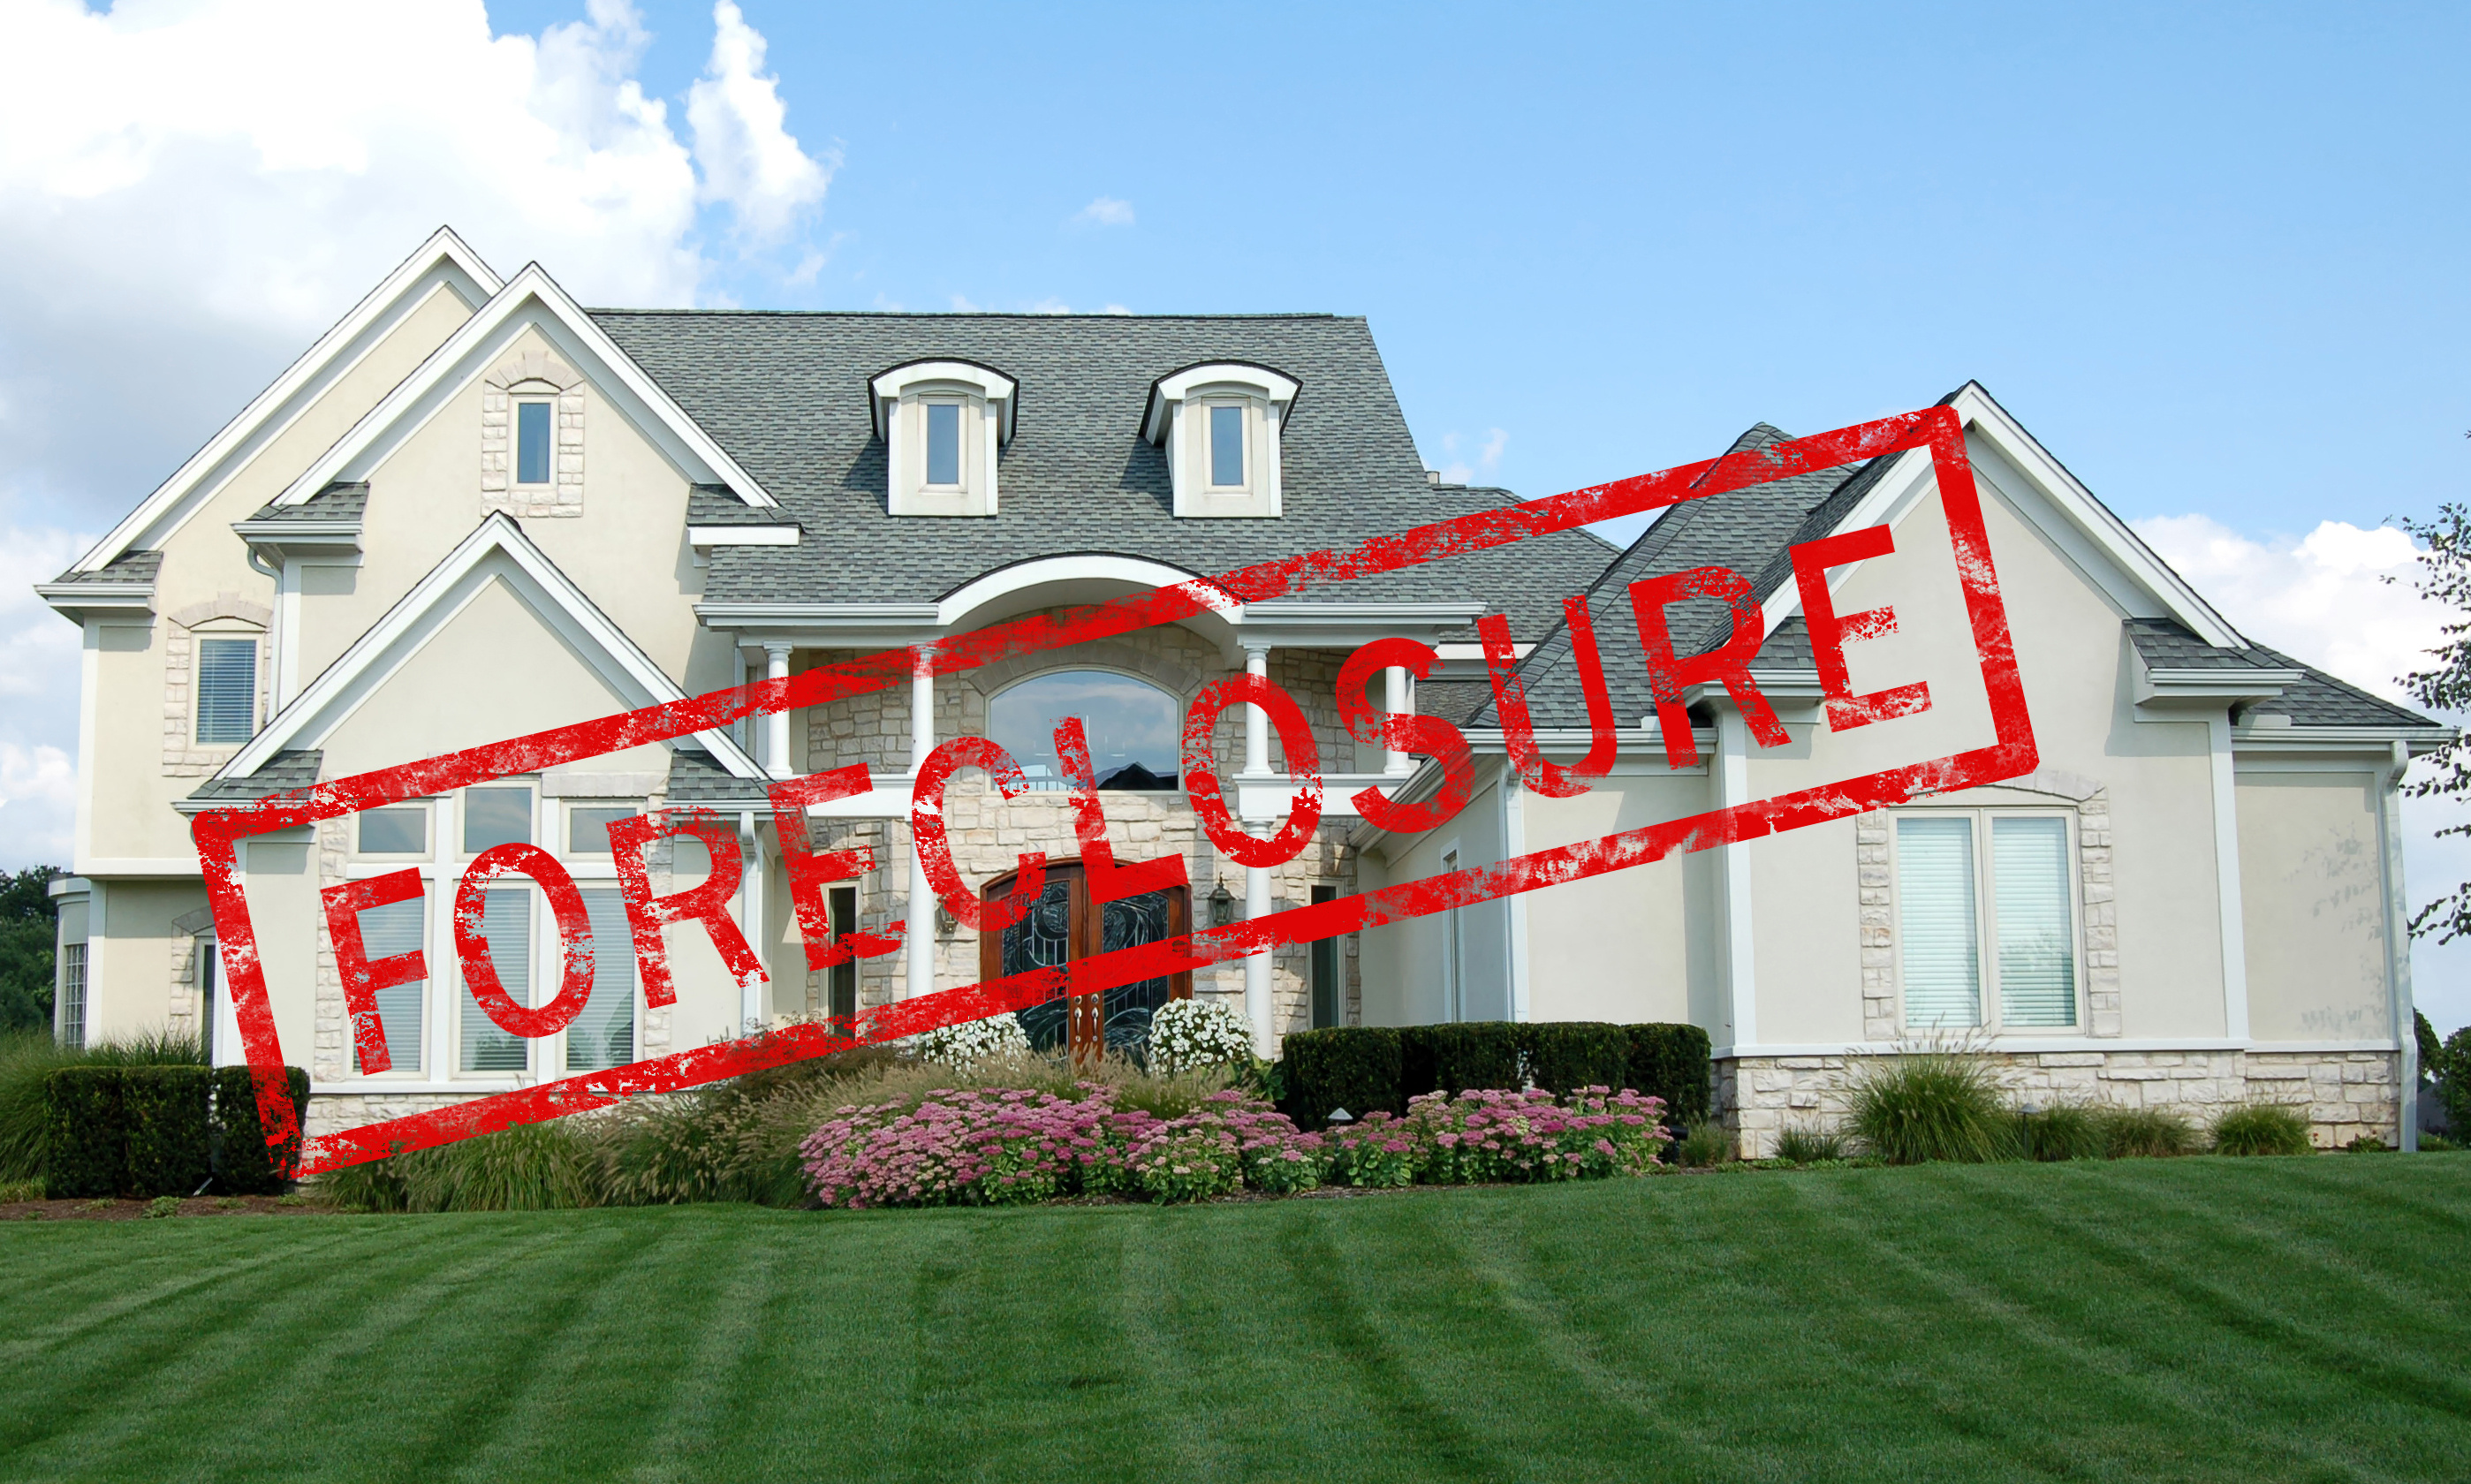 Call Accurate Appraisal and Review Service, Inc. when you need valuations regarding Larimer foreclosures